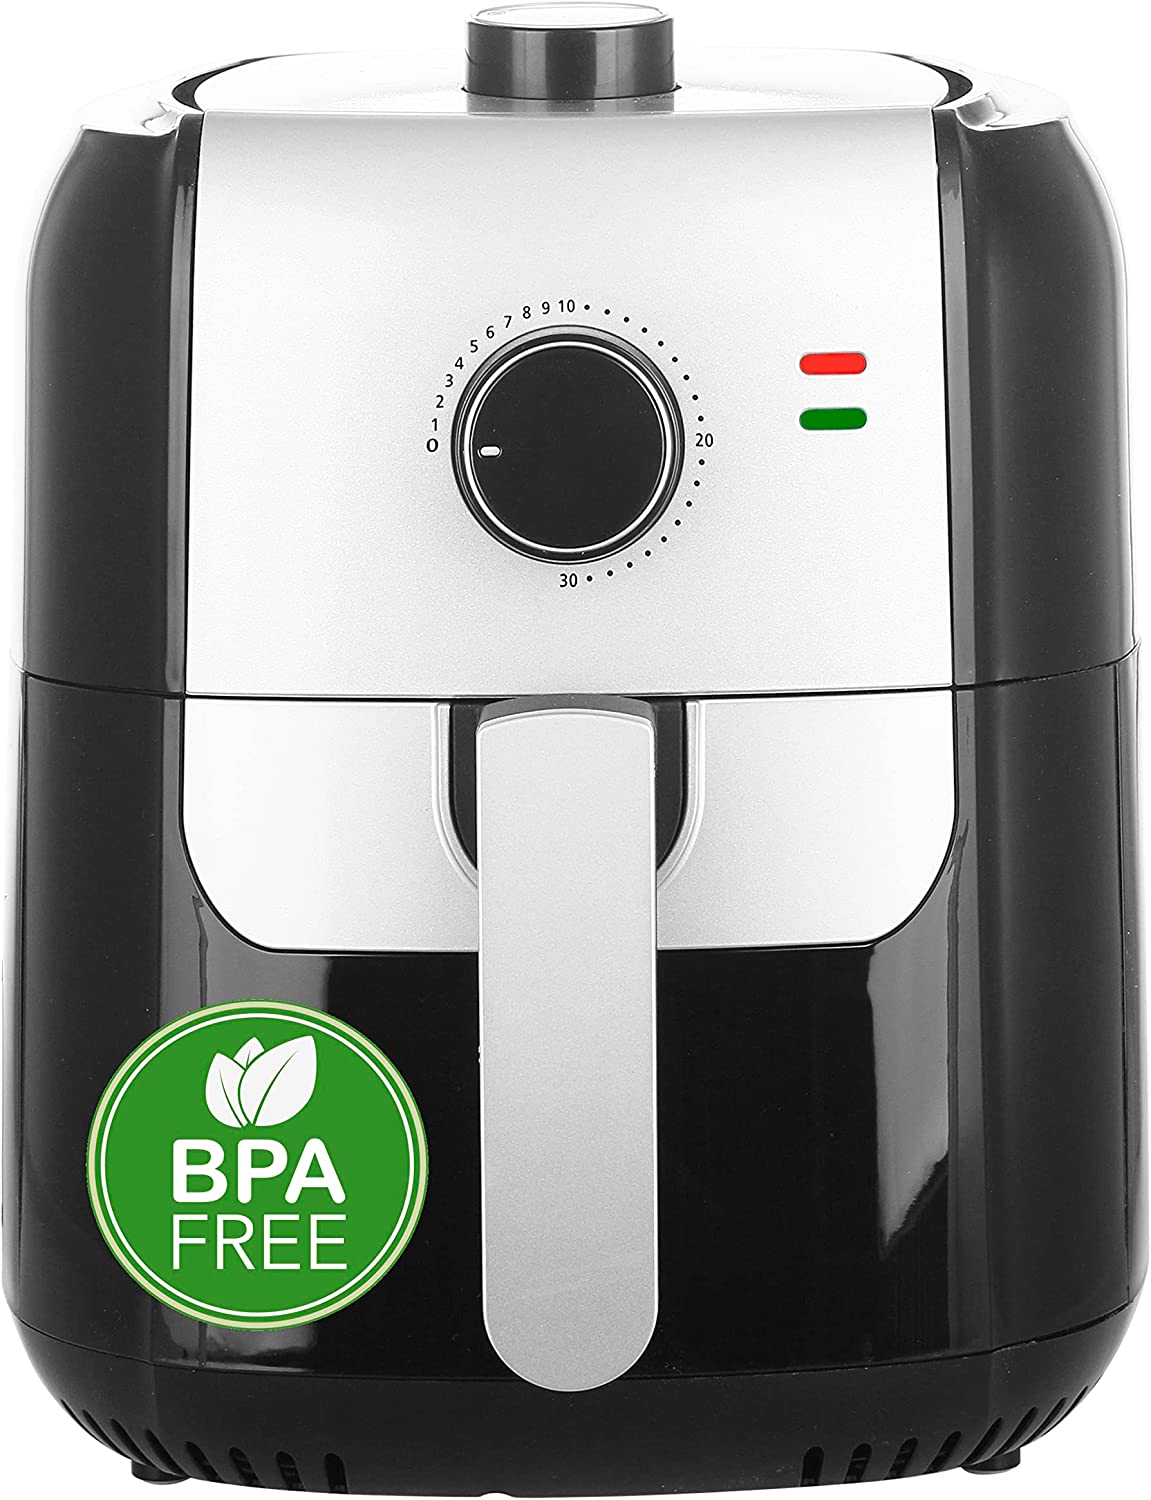 Emerio Hot Air Fryer, Smart Freyer for Frying Without Oil